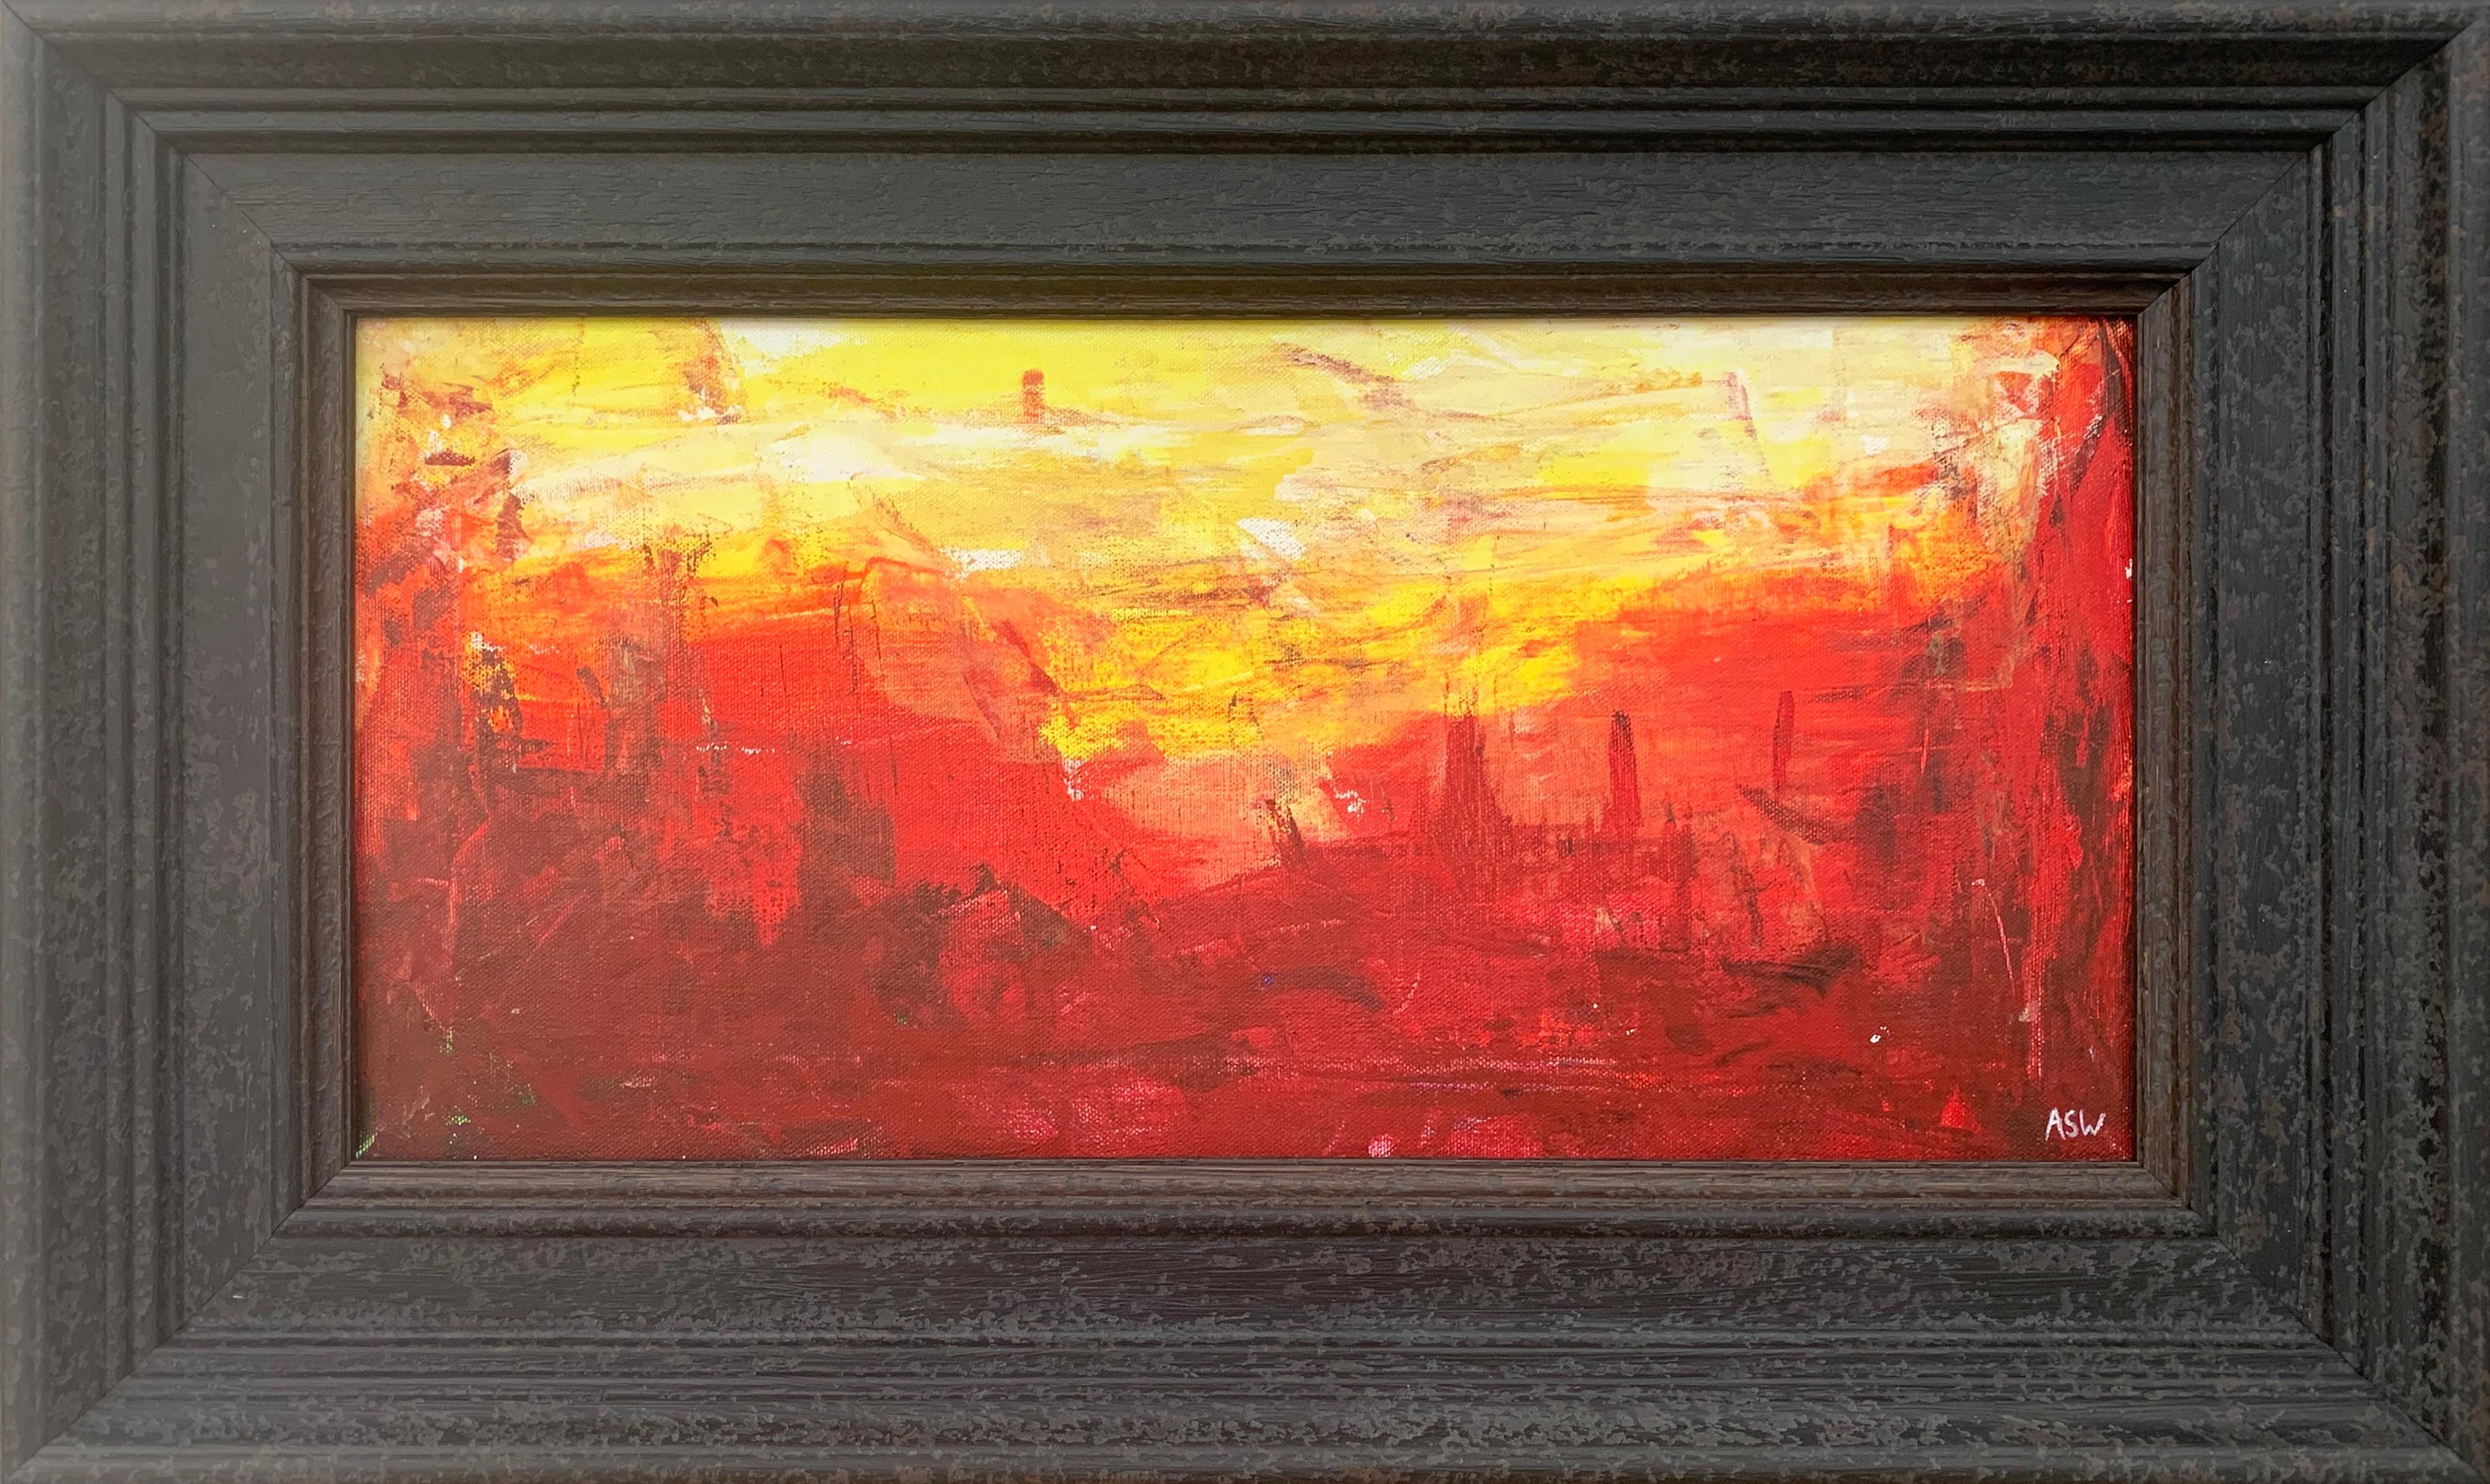 Red & Yellow Abstract Expressionist Landscape Painting by British Urban Artist